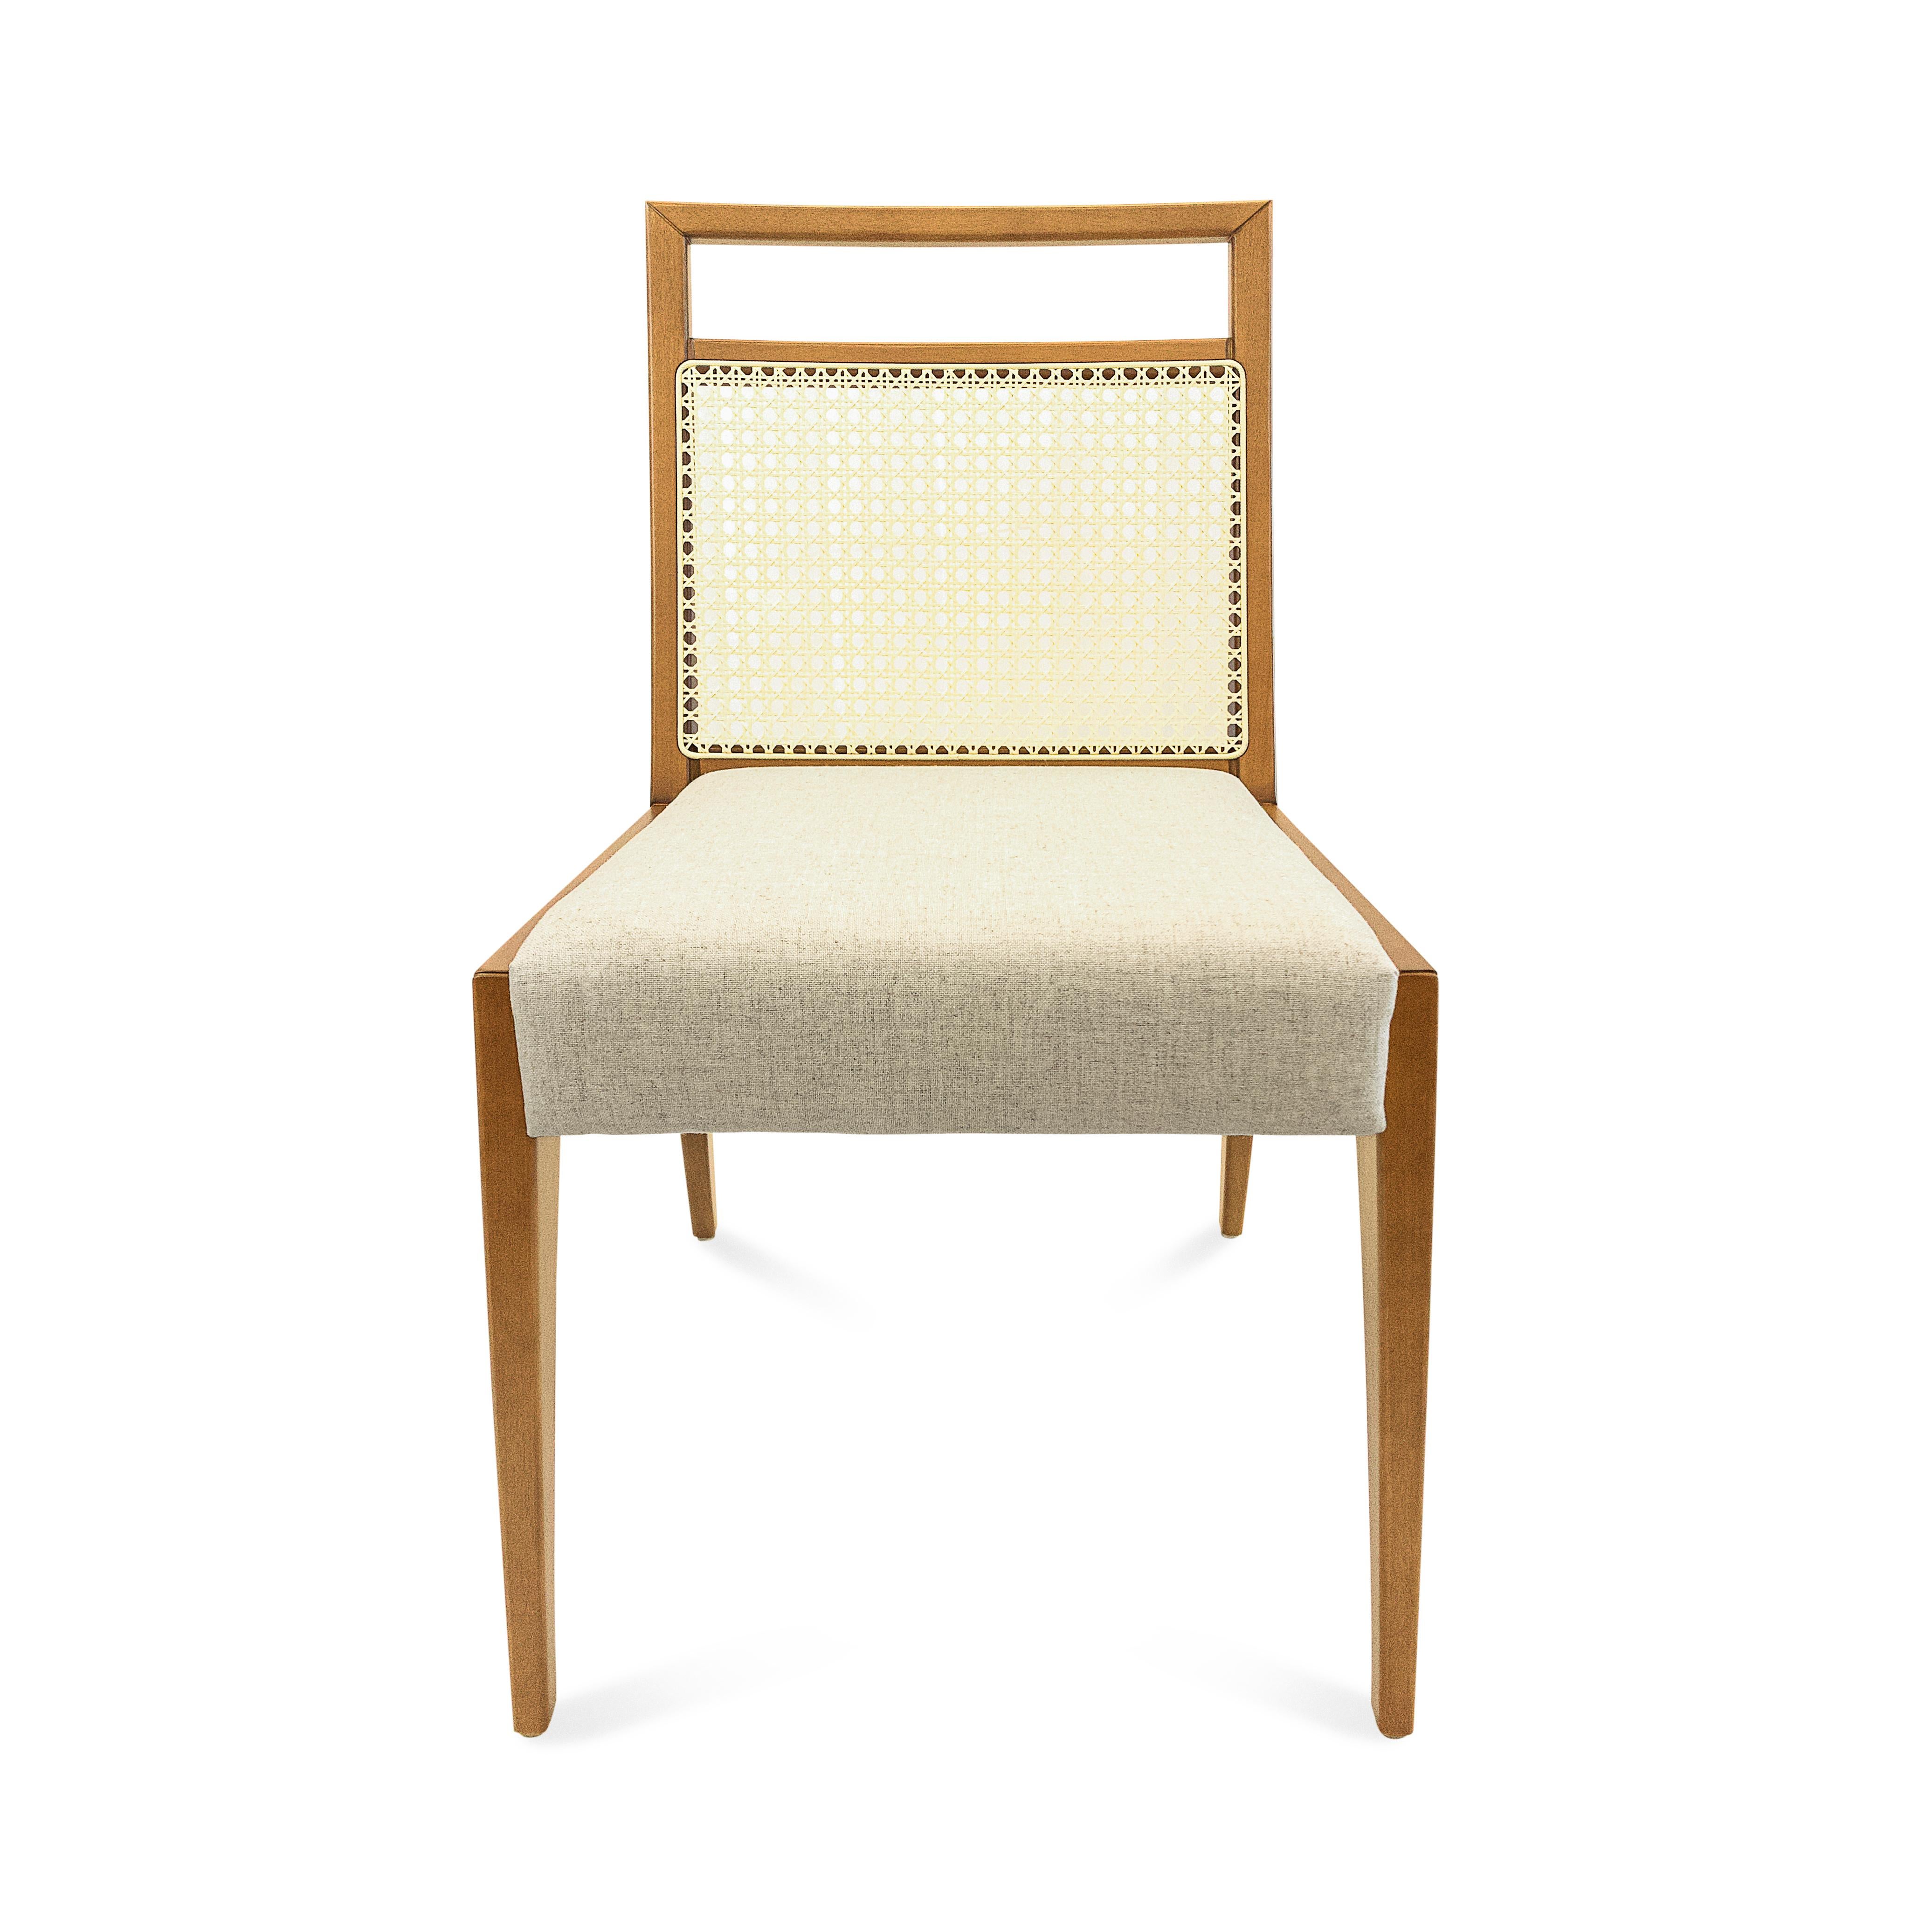 Brazilian Sotto Cane-Back Dining Chair with Open Top Rail in Oak Finish and Oatmeal Seat